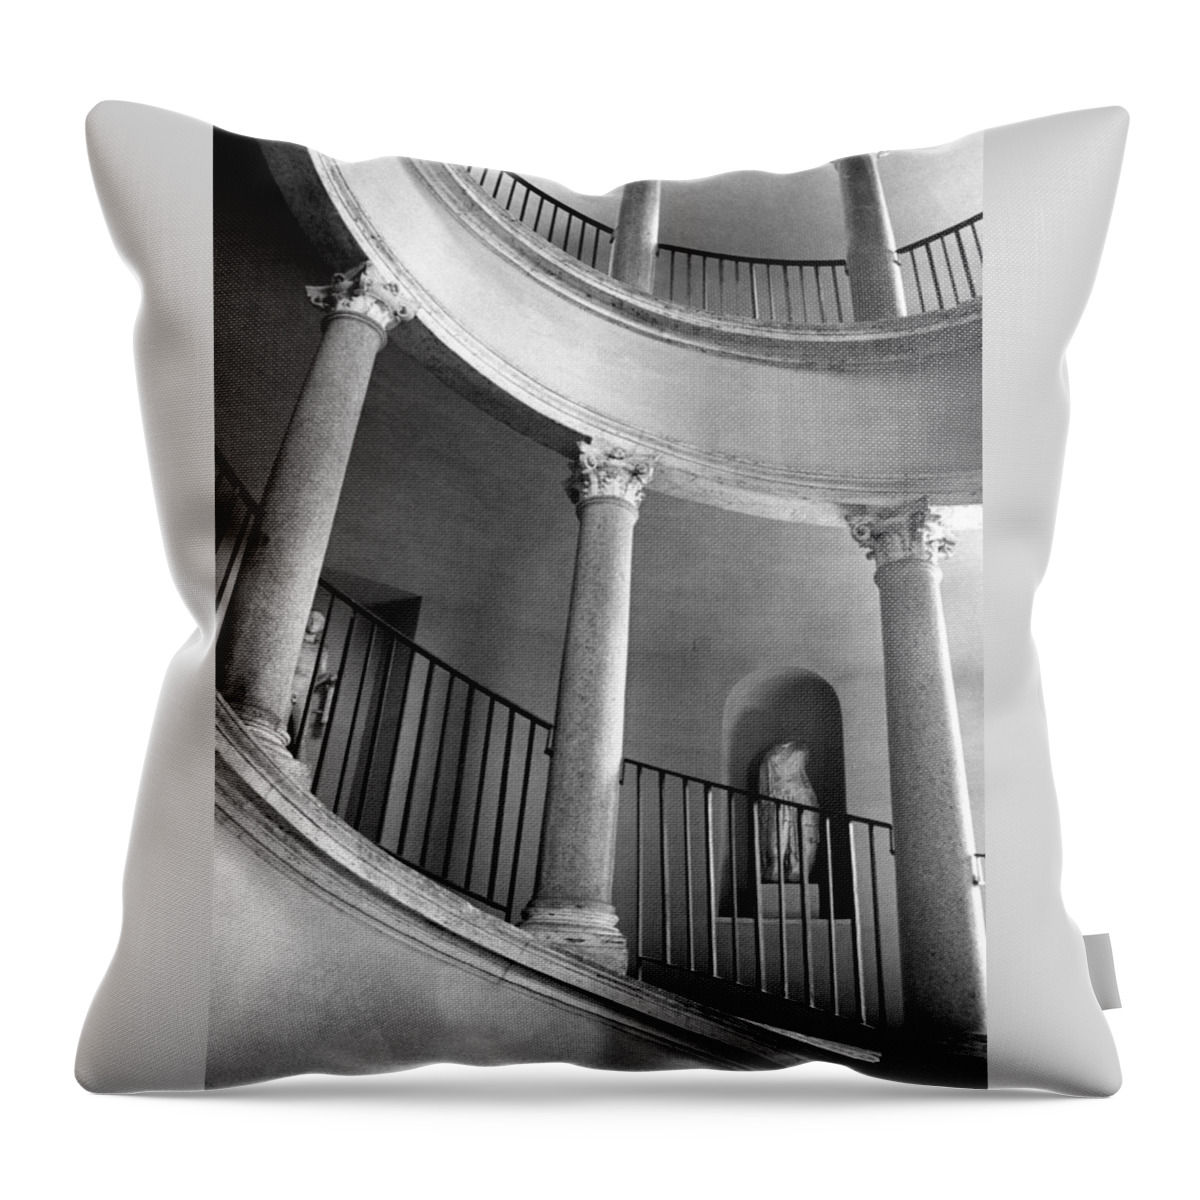 Italy Throw Pillow featuring the photograph Roman Staircase by Donna Corless